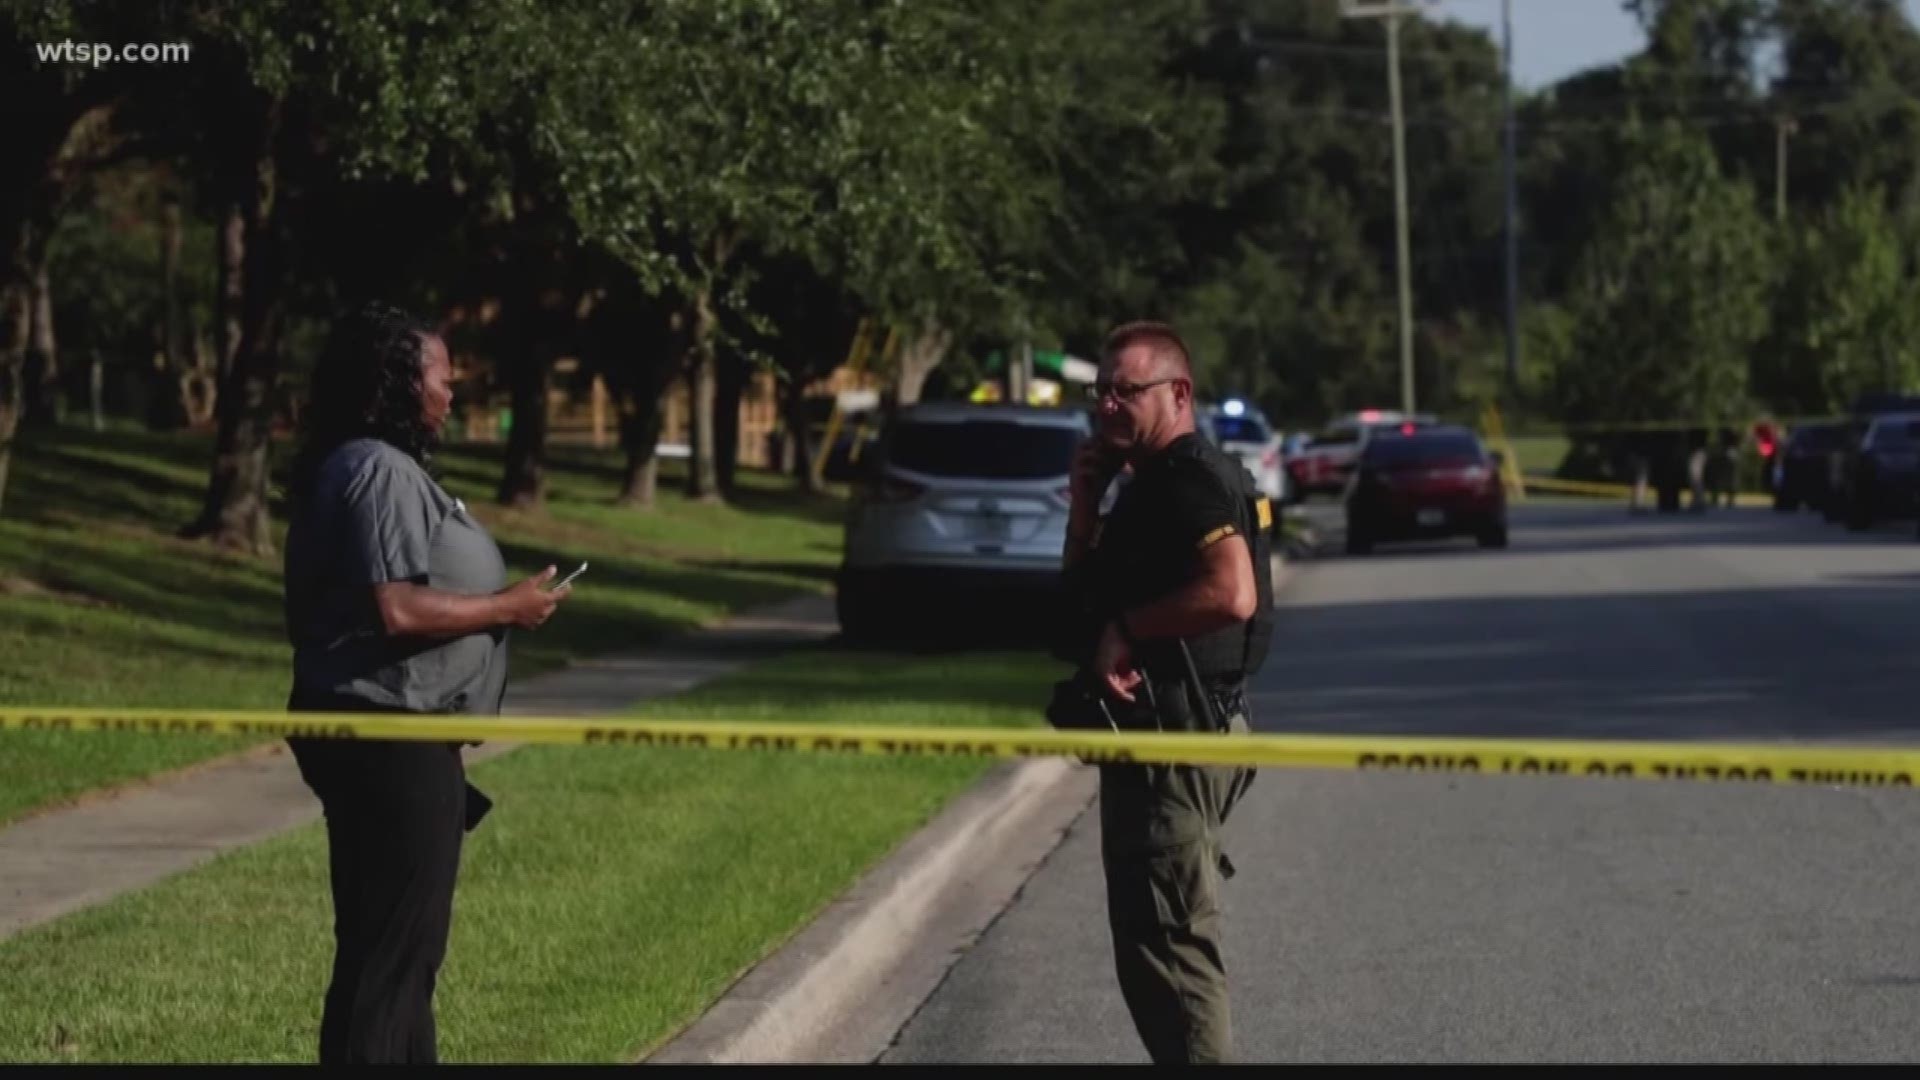 Police say multiple people are hurt after a stabbing at a manufacturing facility in Tallahassee.

Officers said the stabbing happened around 8:37 a.m. Wednesday at Dyke Industries on Maryland Circle. Tallahassee Memorial HealthCare hospital said it received five patients, down from the earlier reported number of six. Police confirmed the number of those hurt.